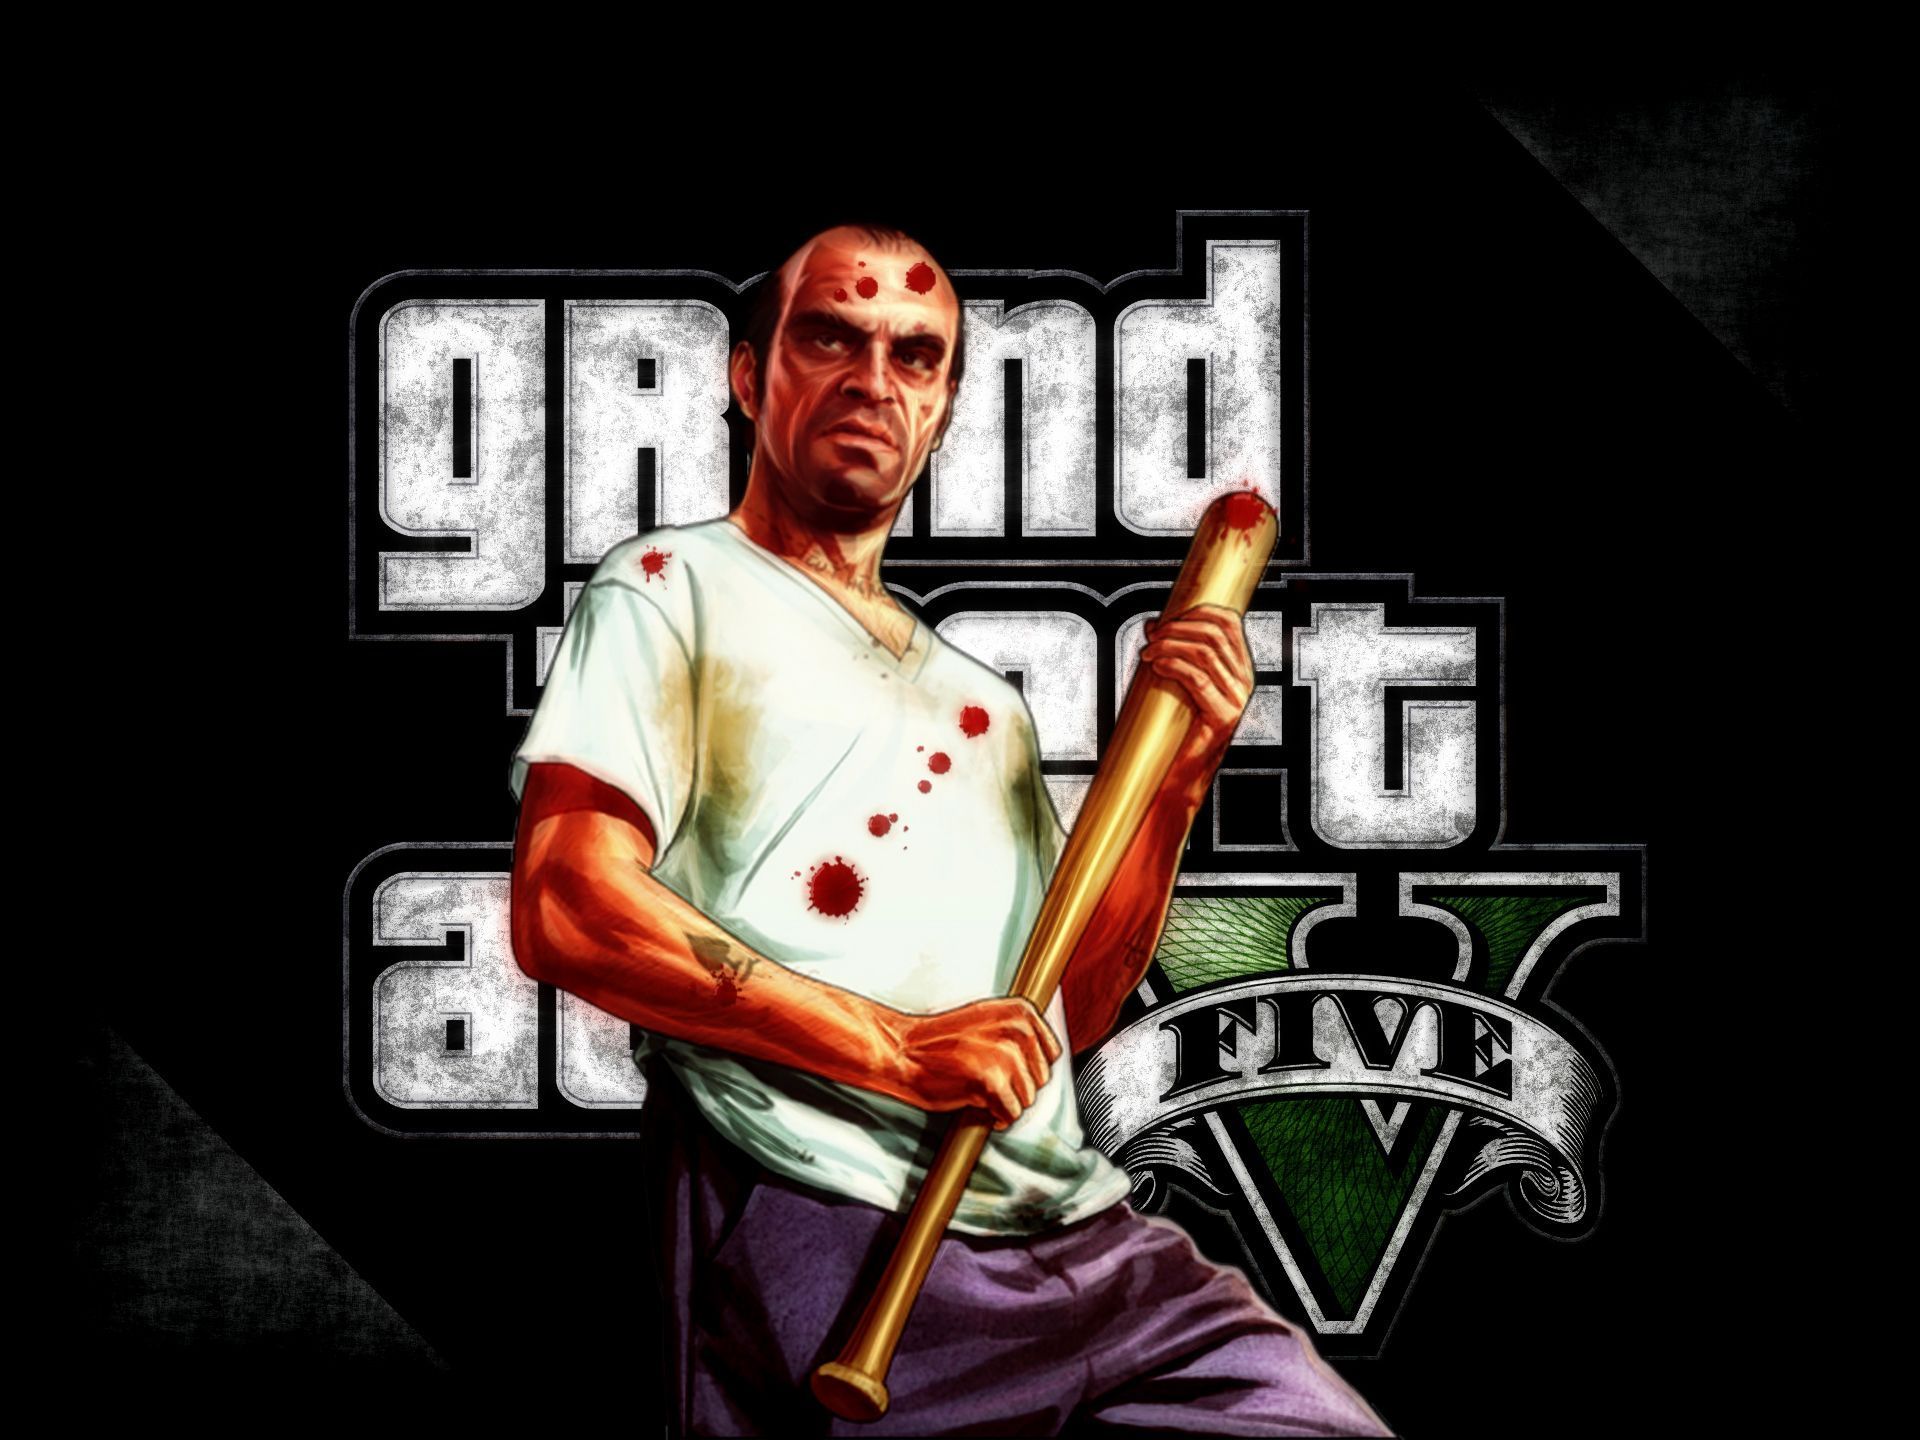 Gta 5 wallpapers for phone фото 102